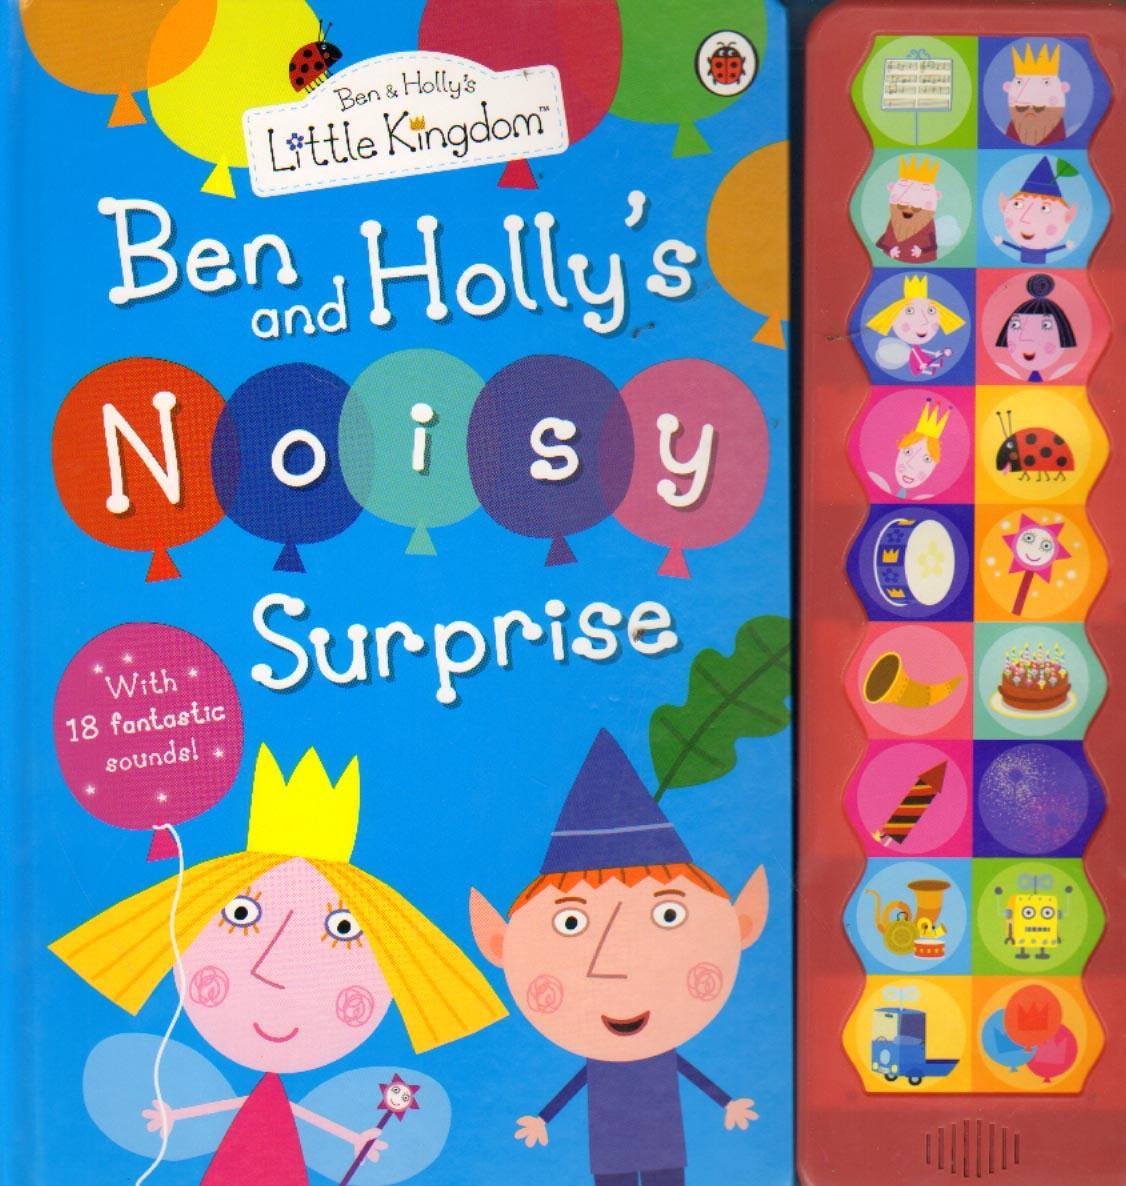 Ben and Holly's Little Kingdom: Ben and Holly's Noisy Surpri